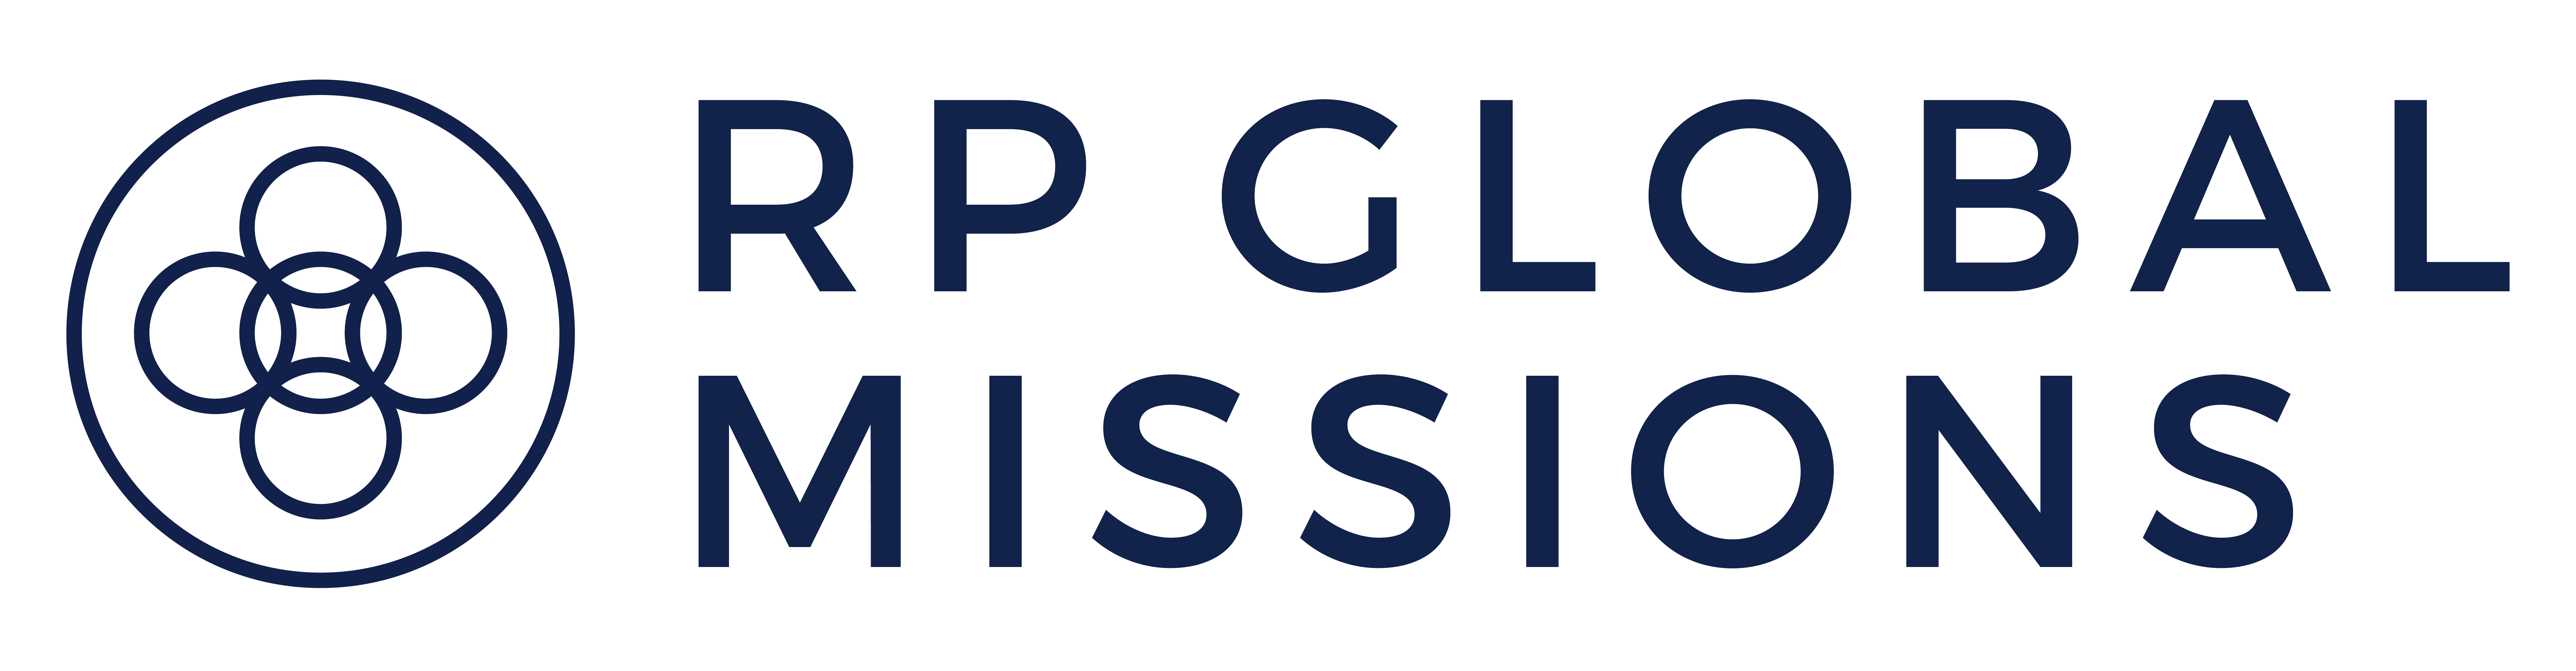 RP Missions Logo